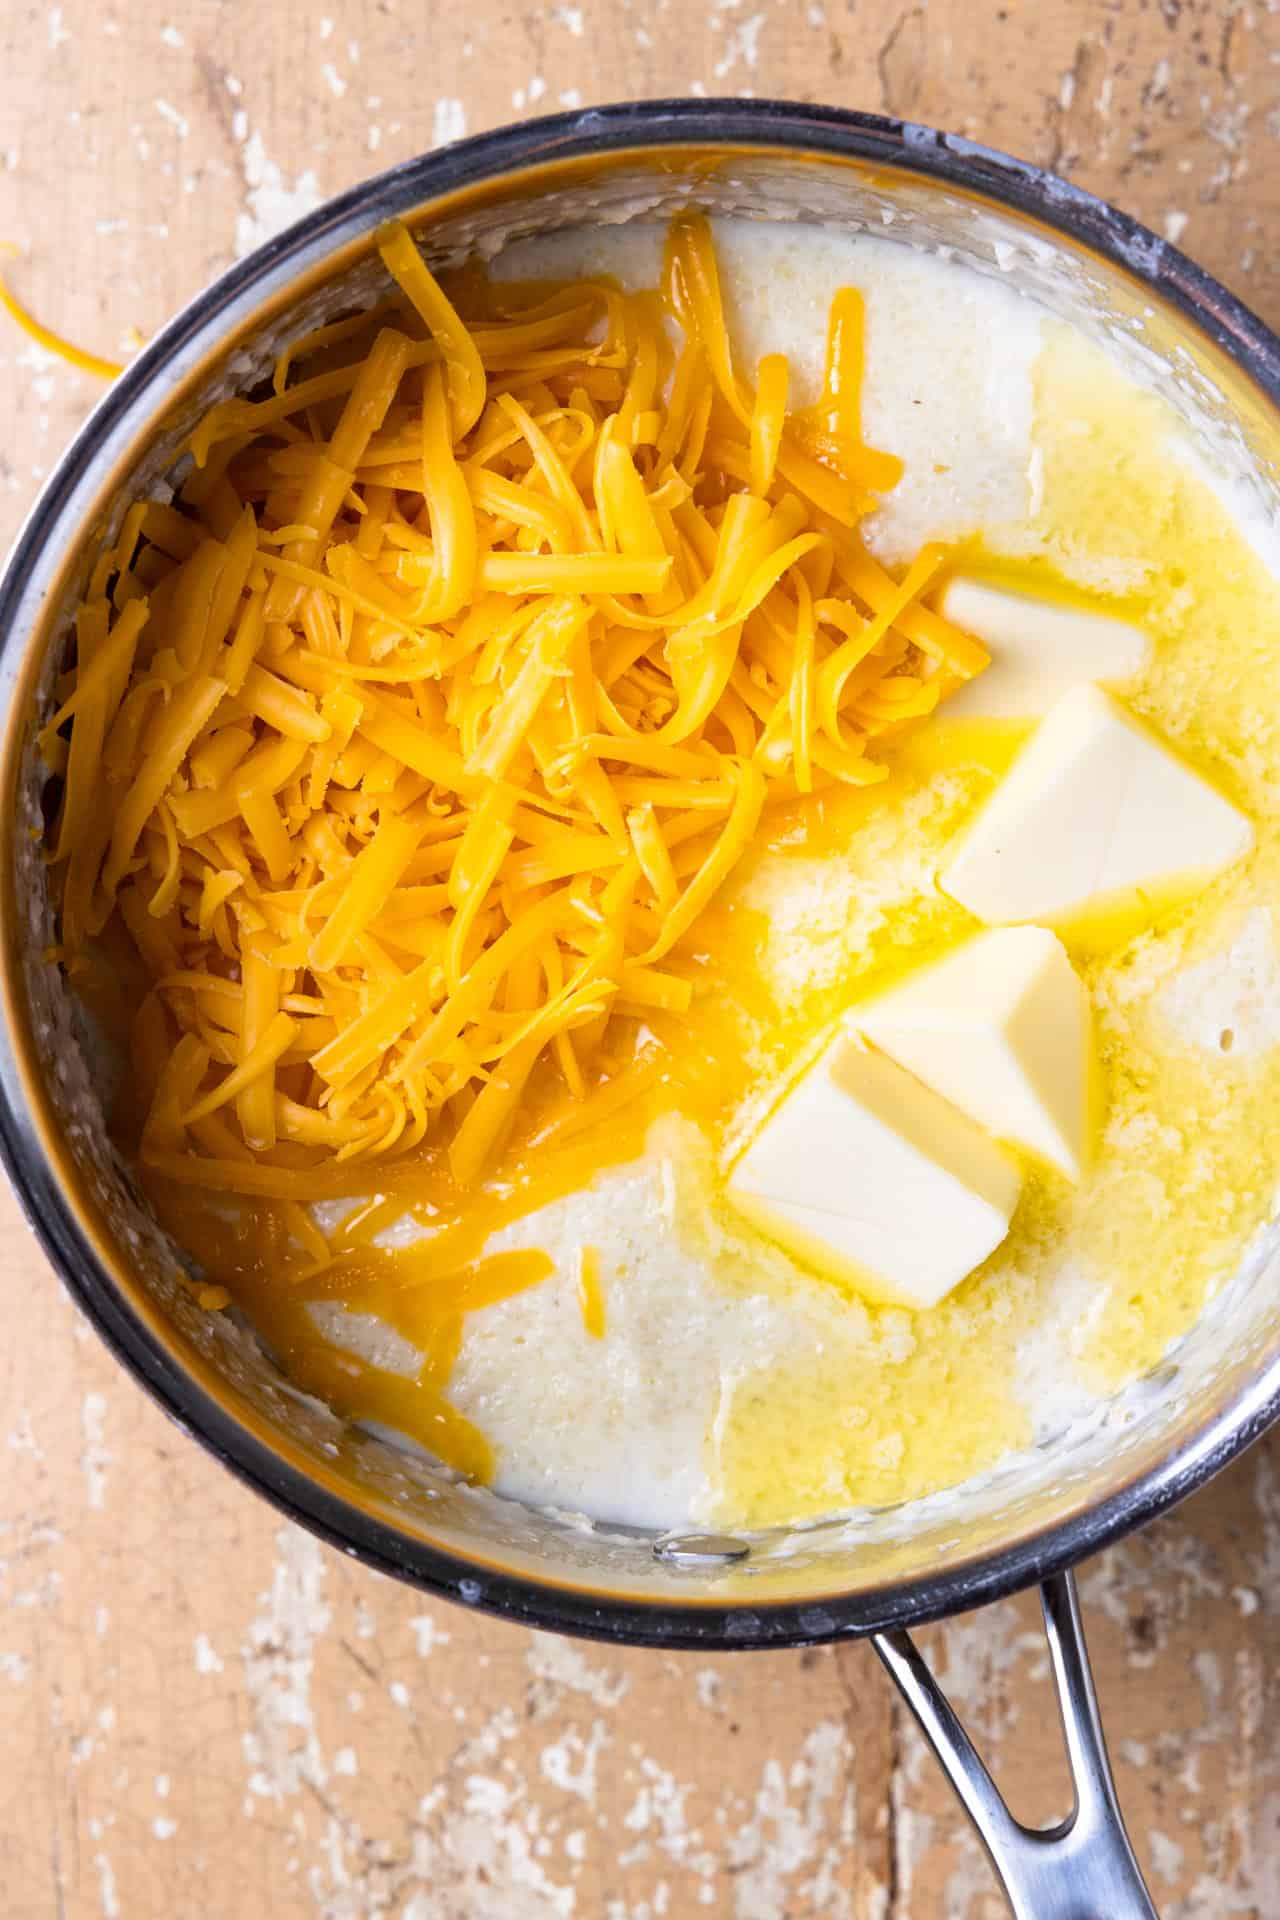 How to make cheese grits, showing adding butter and cheese